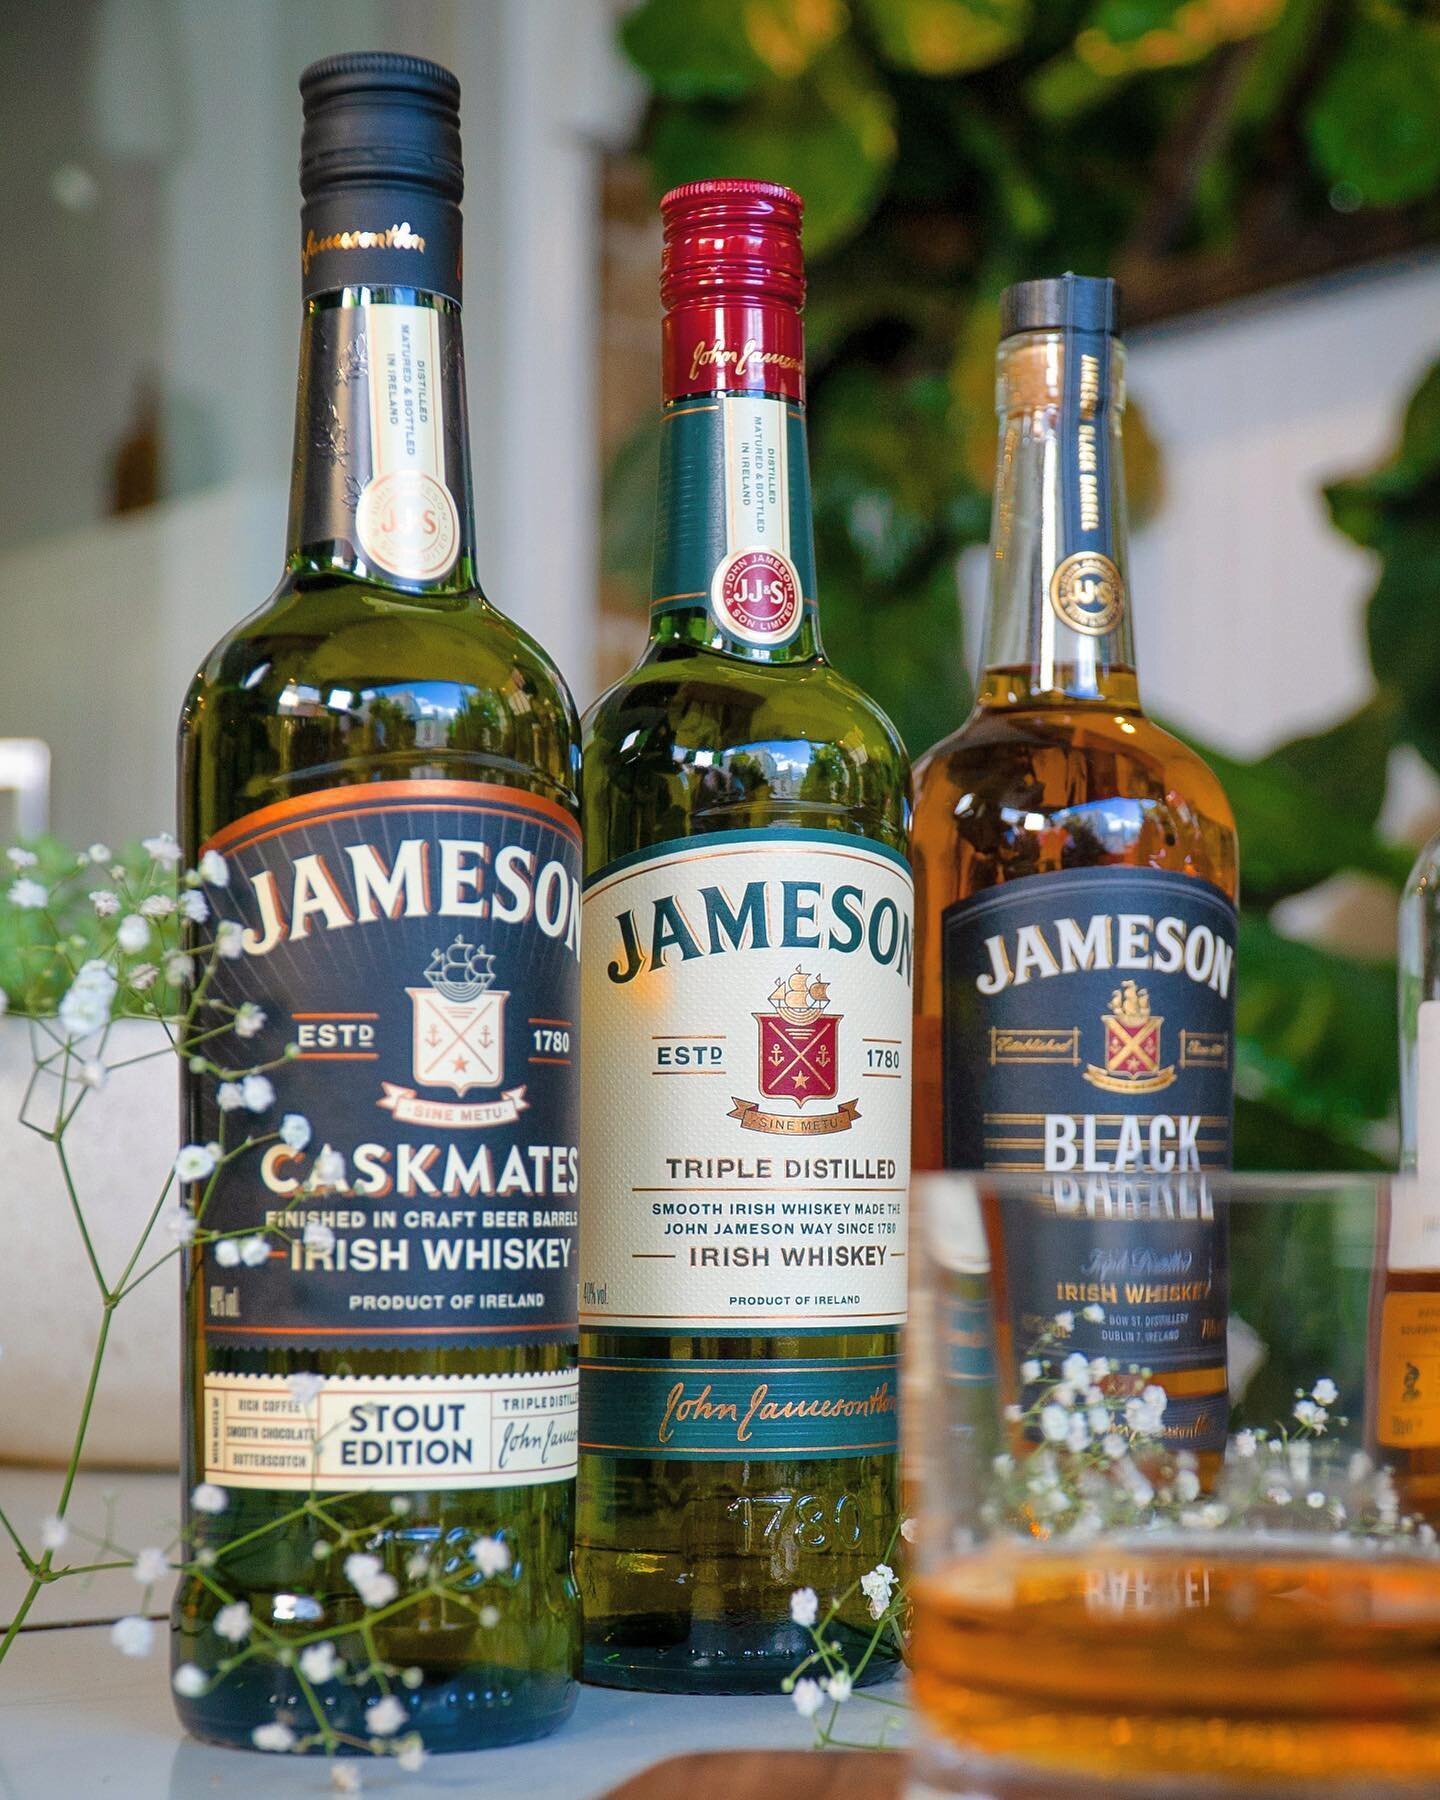 A few of the stars from the Jameson&rsquo;s &ldquo;Passion Project&rdquo; for Pernod Ricard.